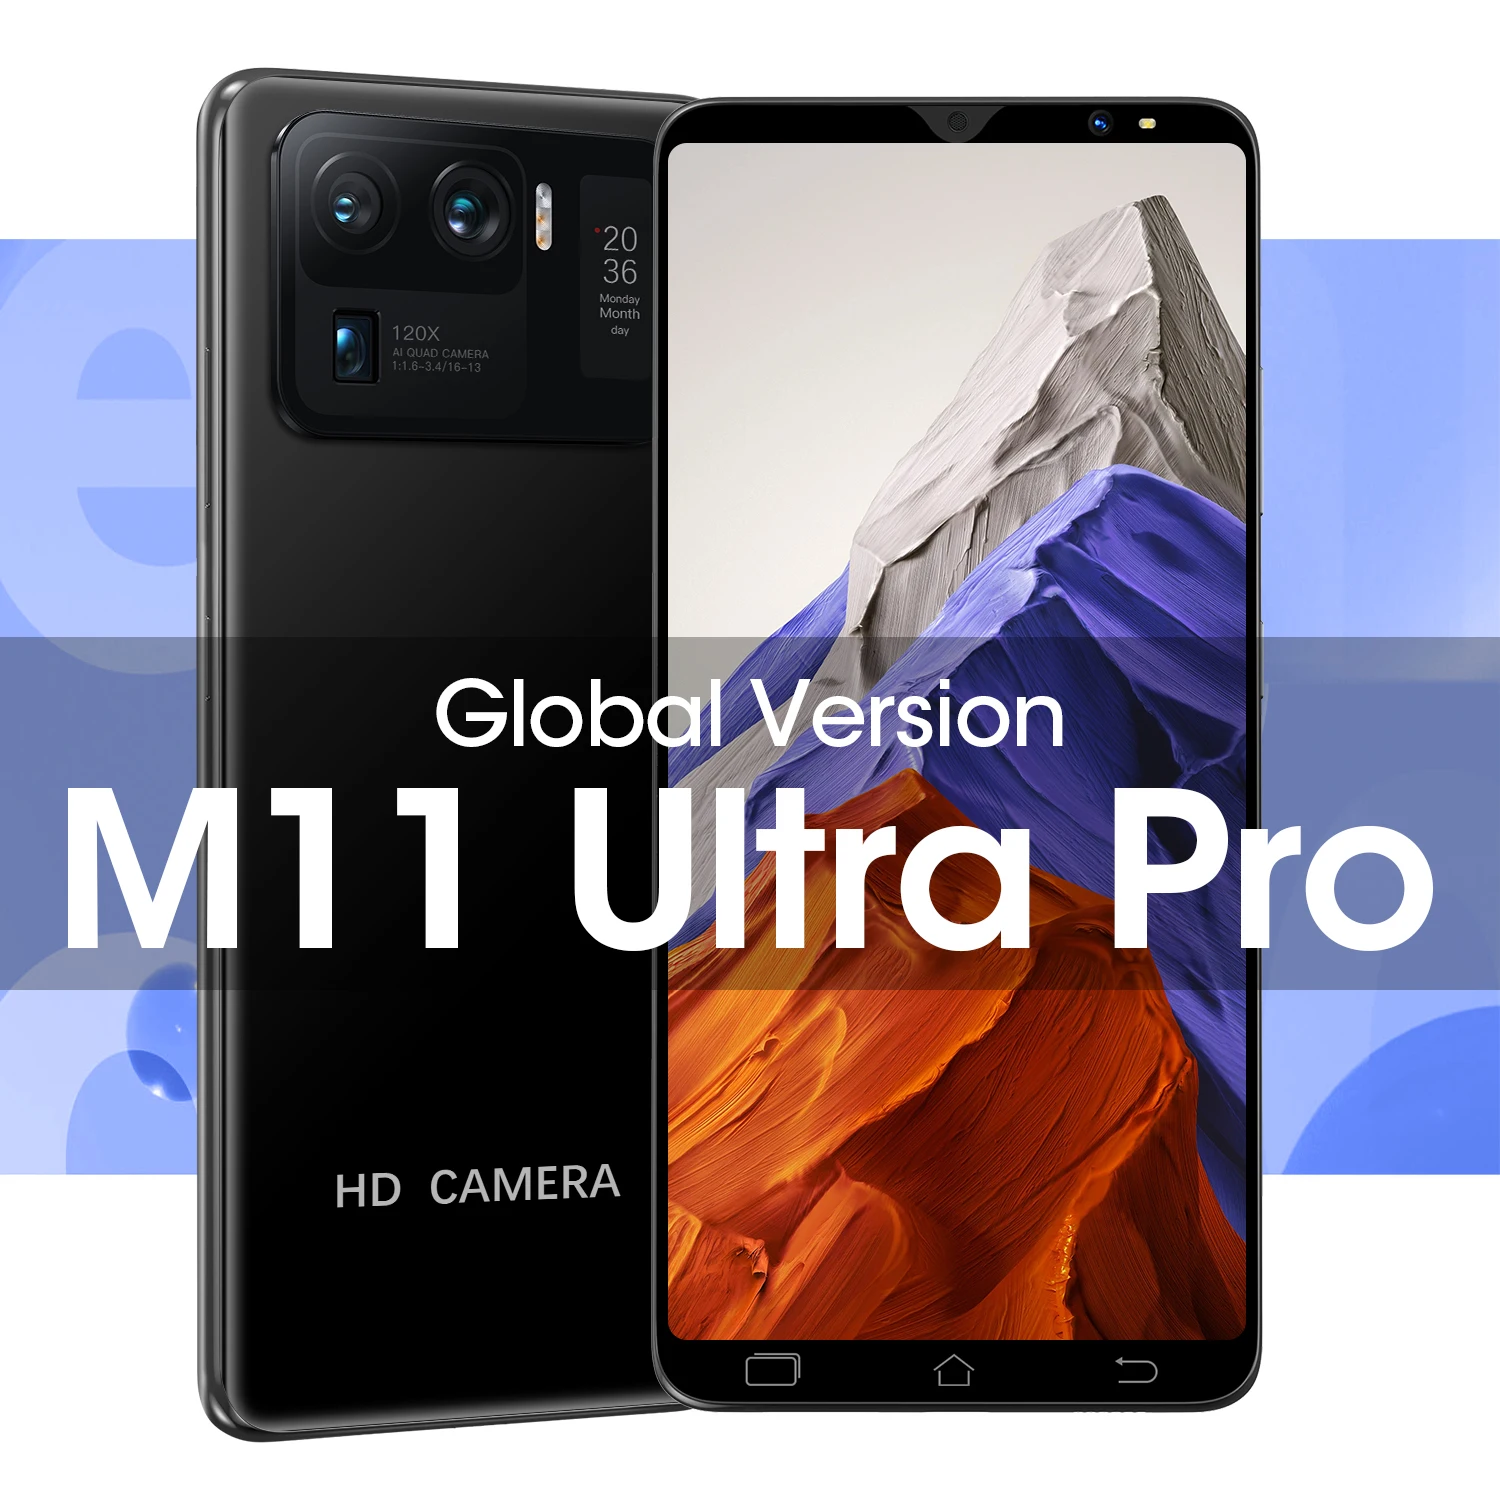 m11 ultra pro cellphone android system 1gb ram 8gb rom smartphone 5 5inch hd screen camera mobile phone free global shipping